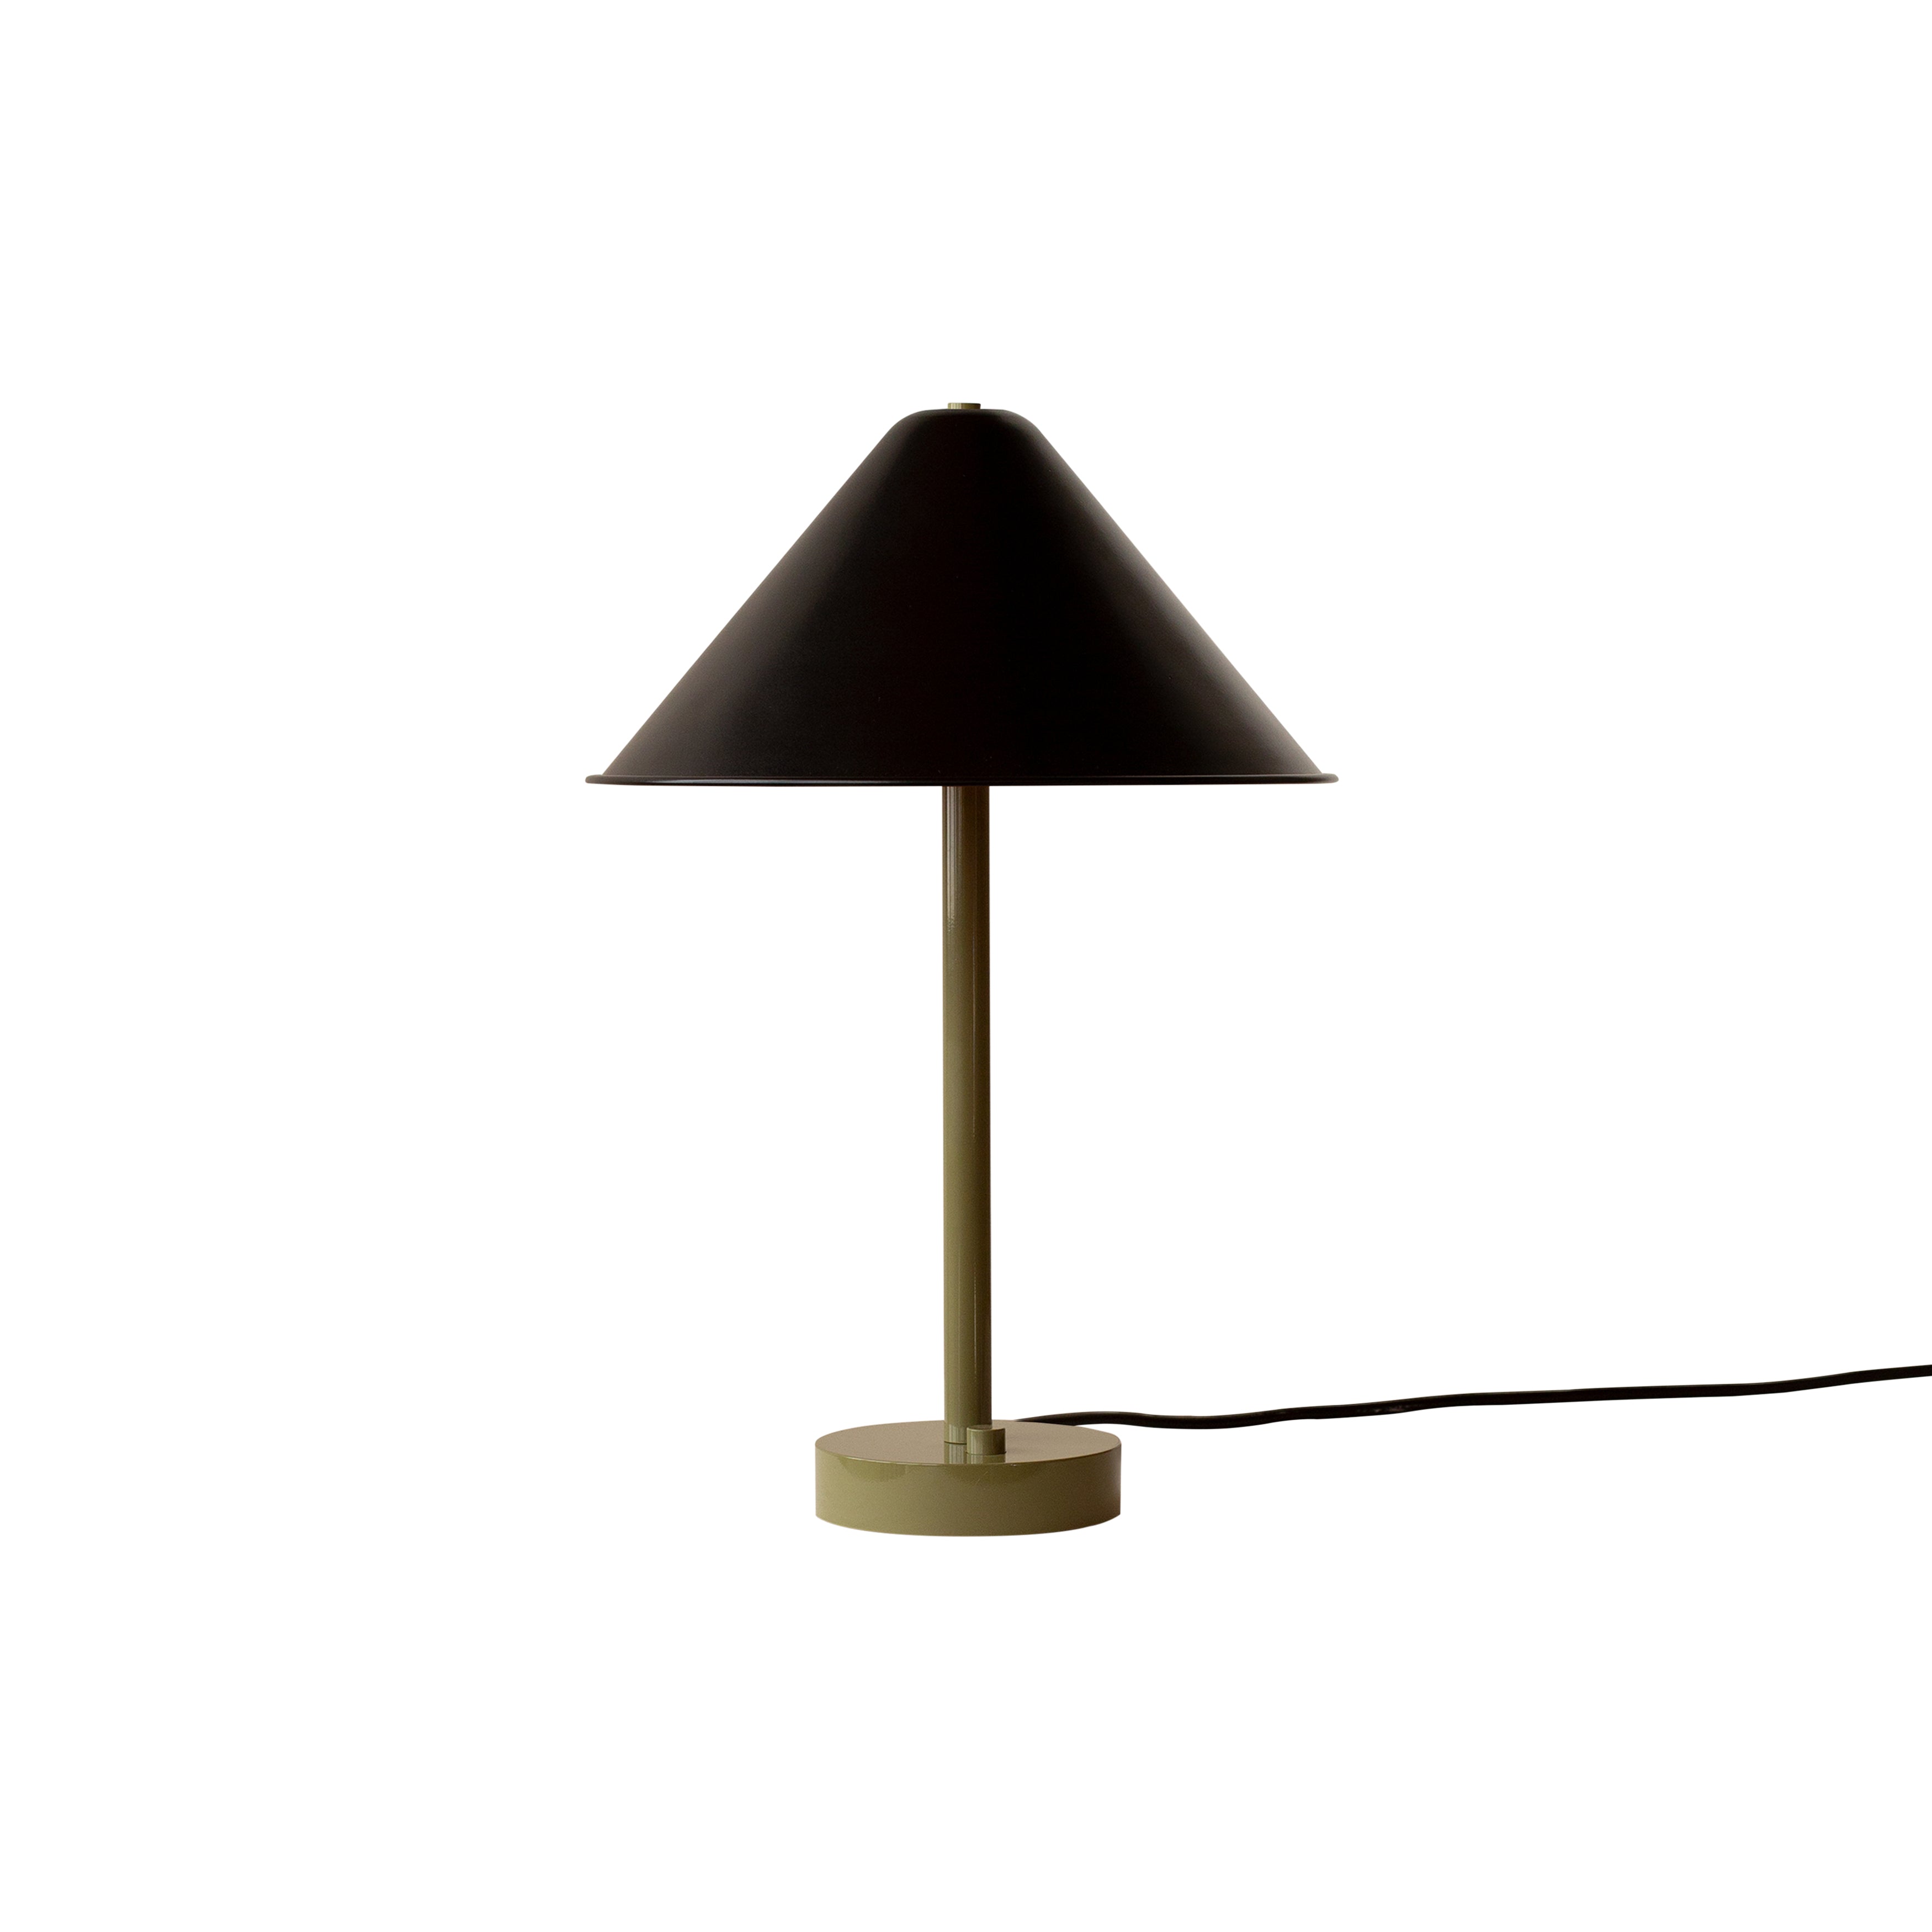 Tipi Table Lamp: Black + Reed Green